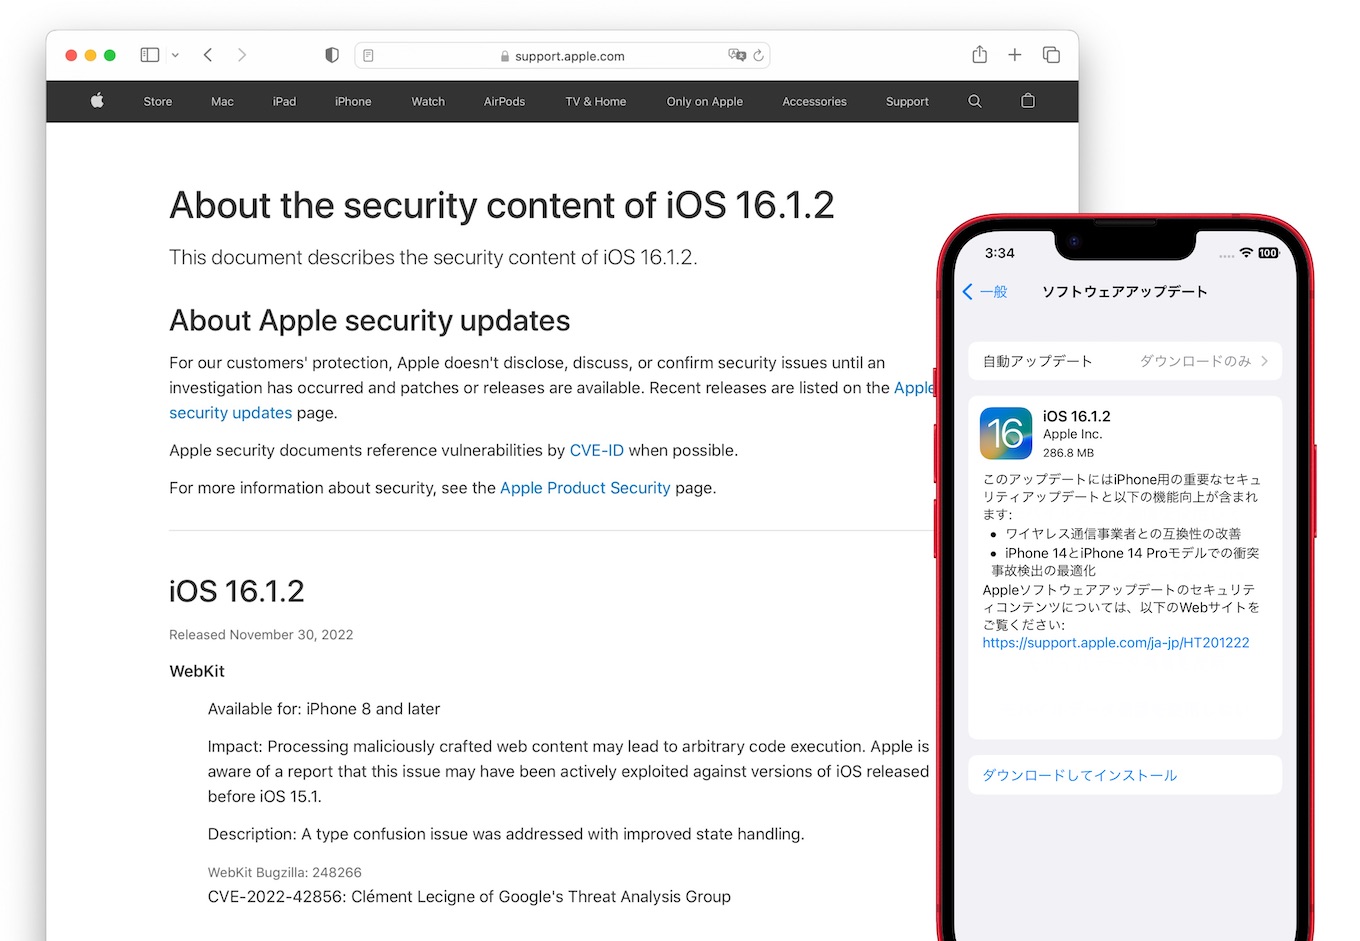 About the security content of iOS 16.1.2